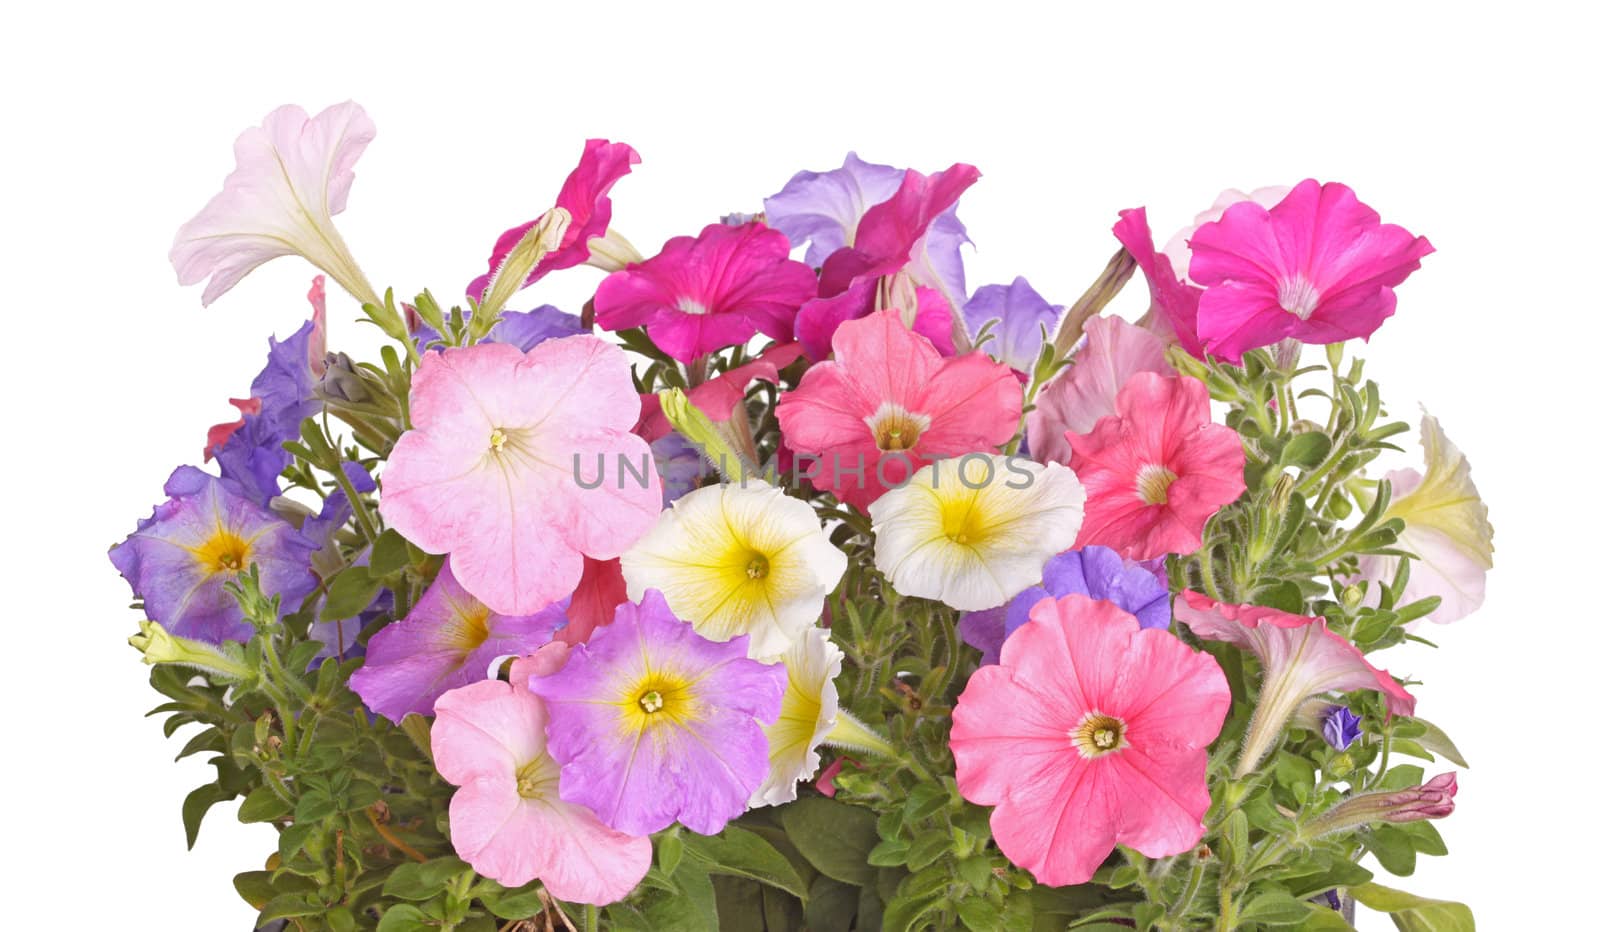 Side view of petunia plants flowering in multiple colors against a white background